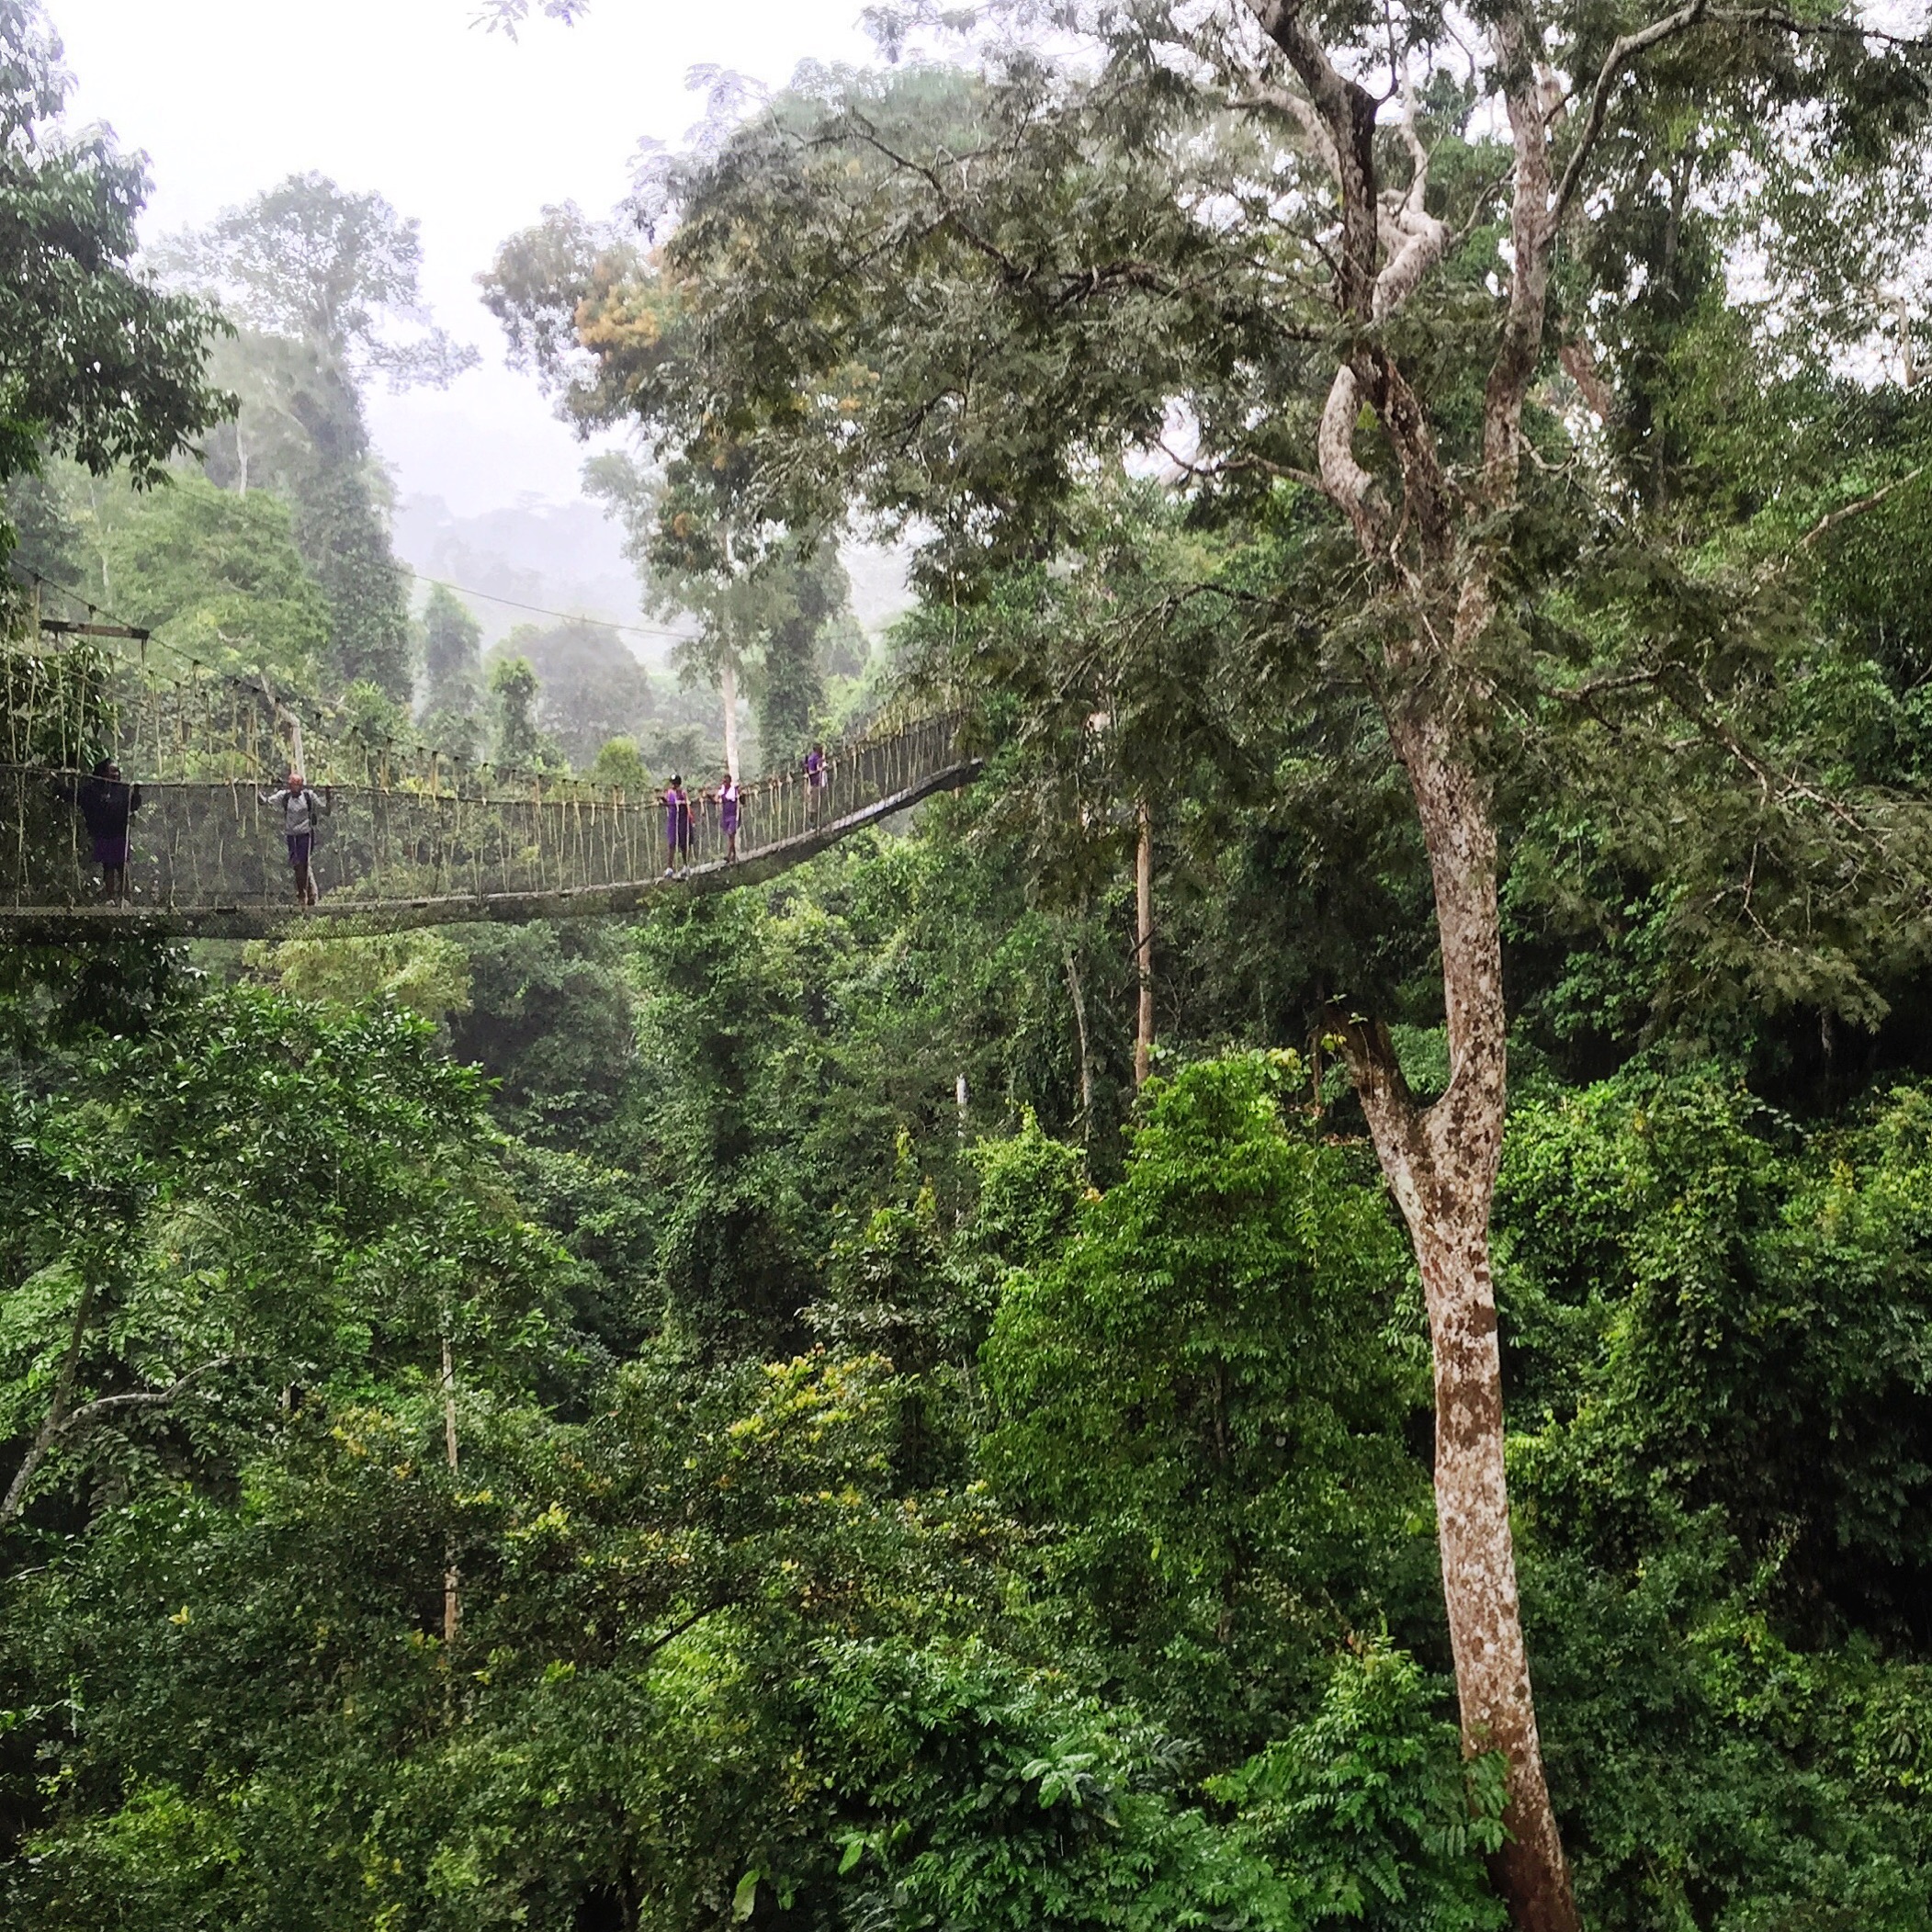 a bridge suspended in the canopy of the trees